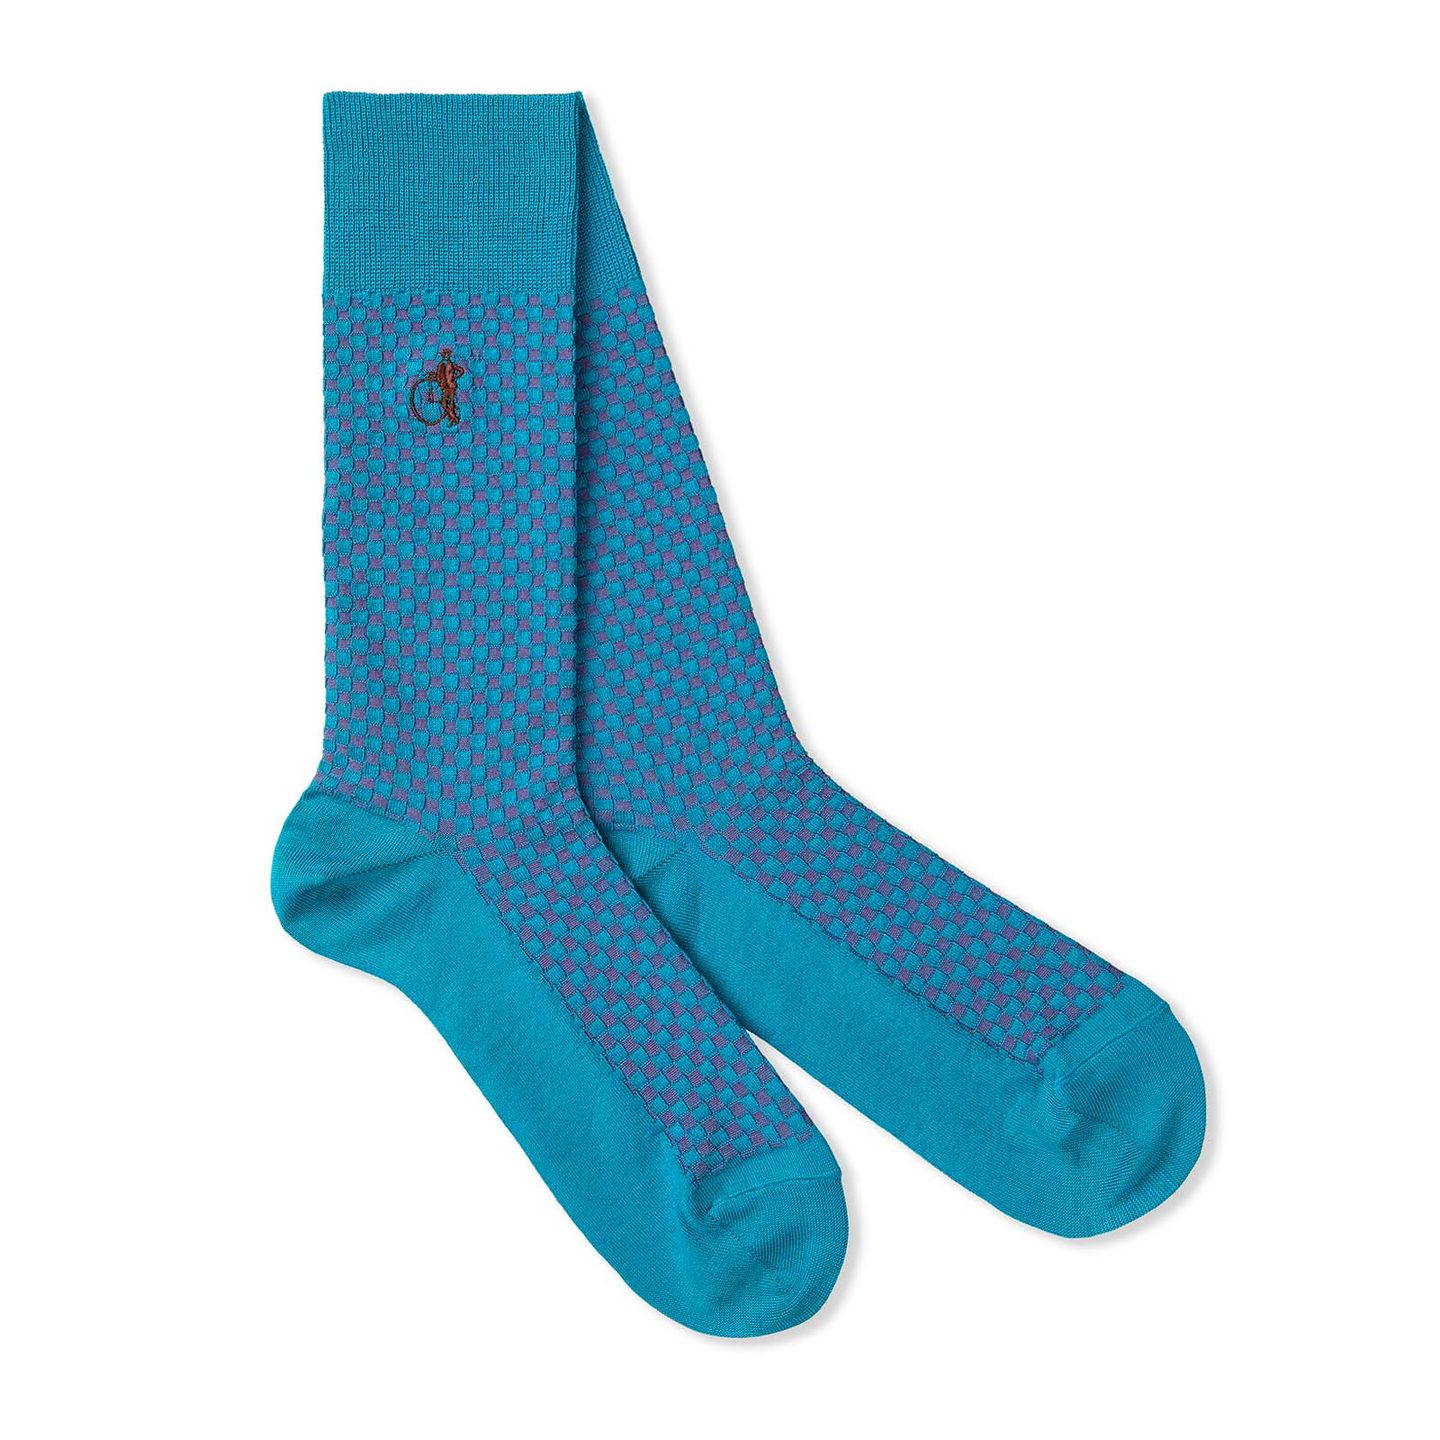 A pair of blue and pink patterned socks with a white background